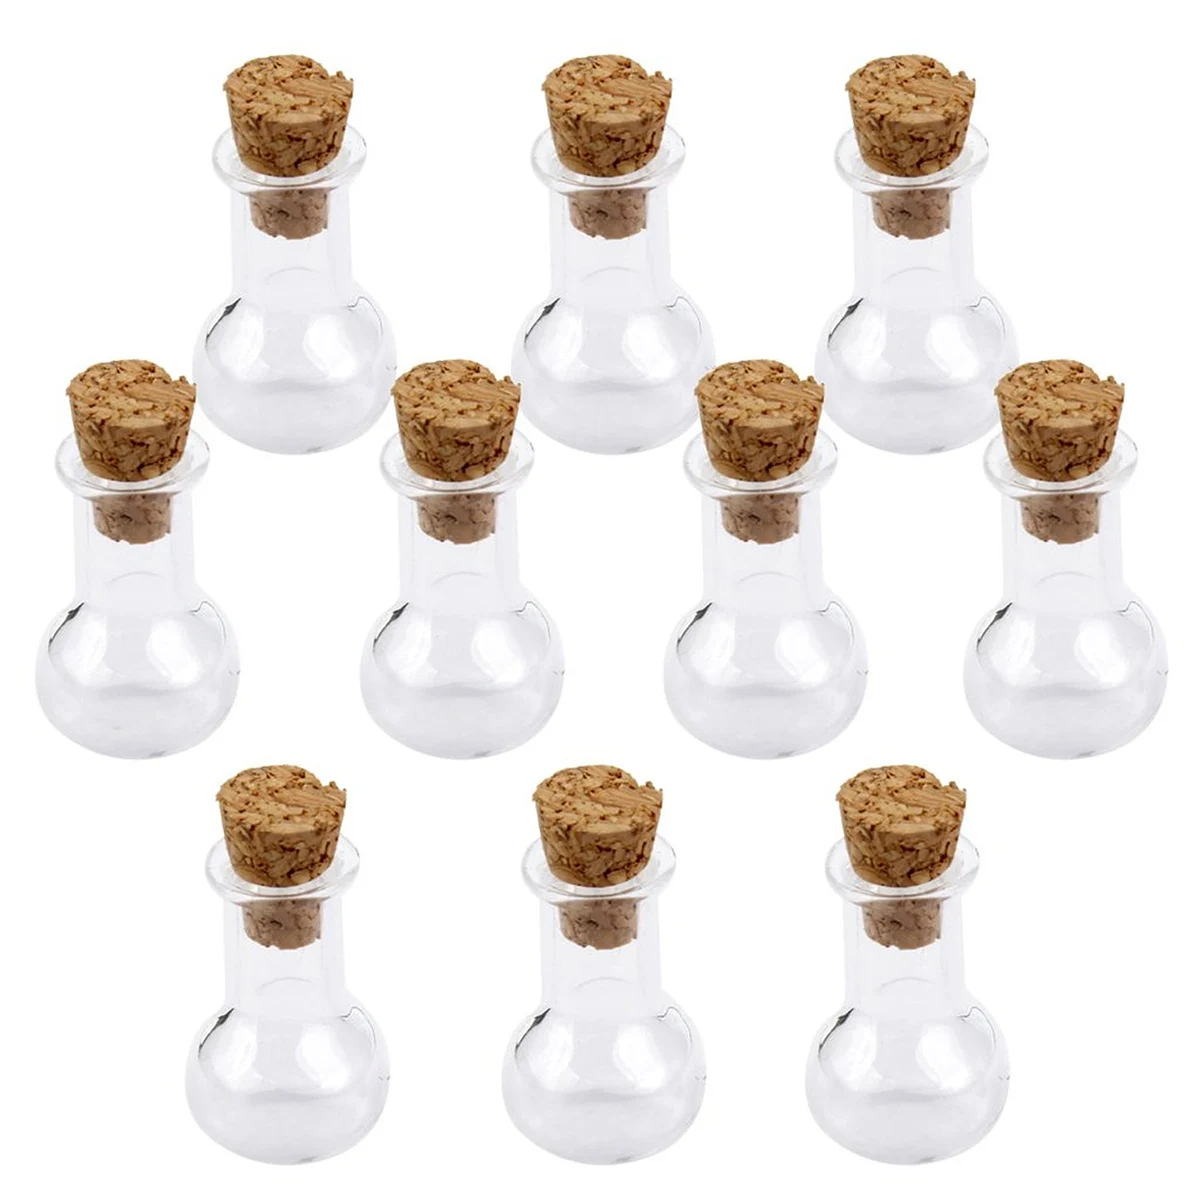 

10pcs Bulb Shape Mini Glass Bottles Jars with Cork Wish Note Craft Bottle Event Party Wedding Birthday Decoration Gift(Clear)